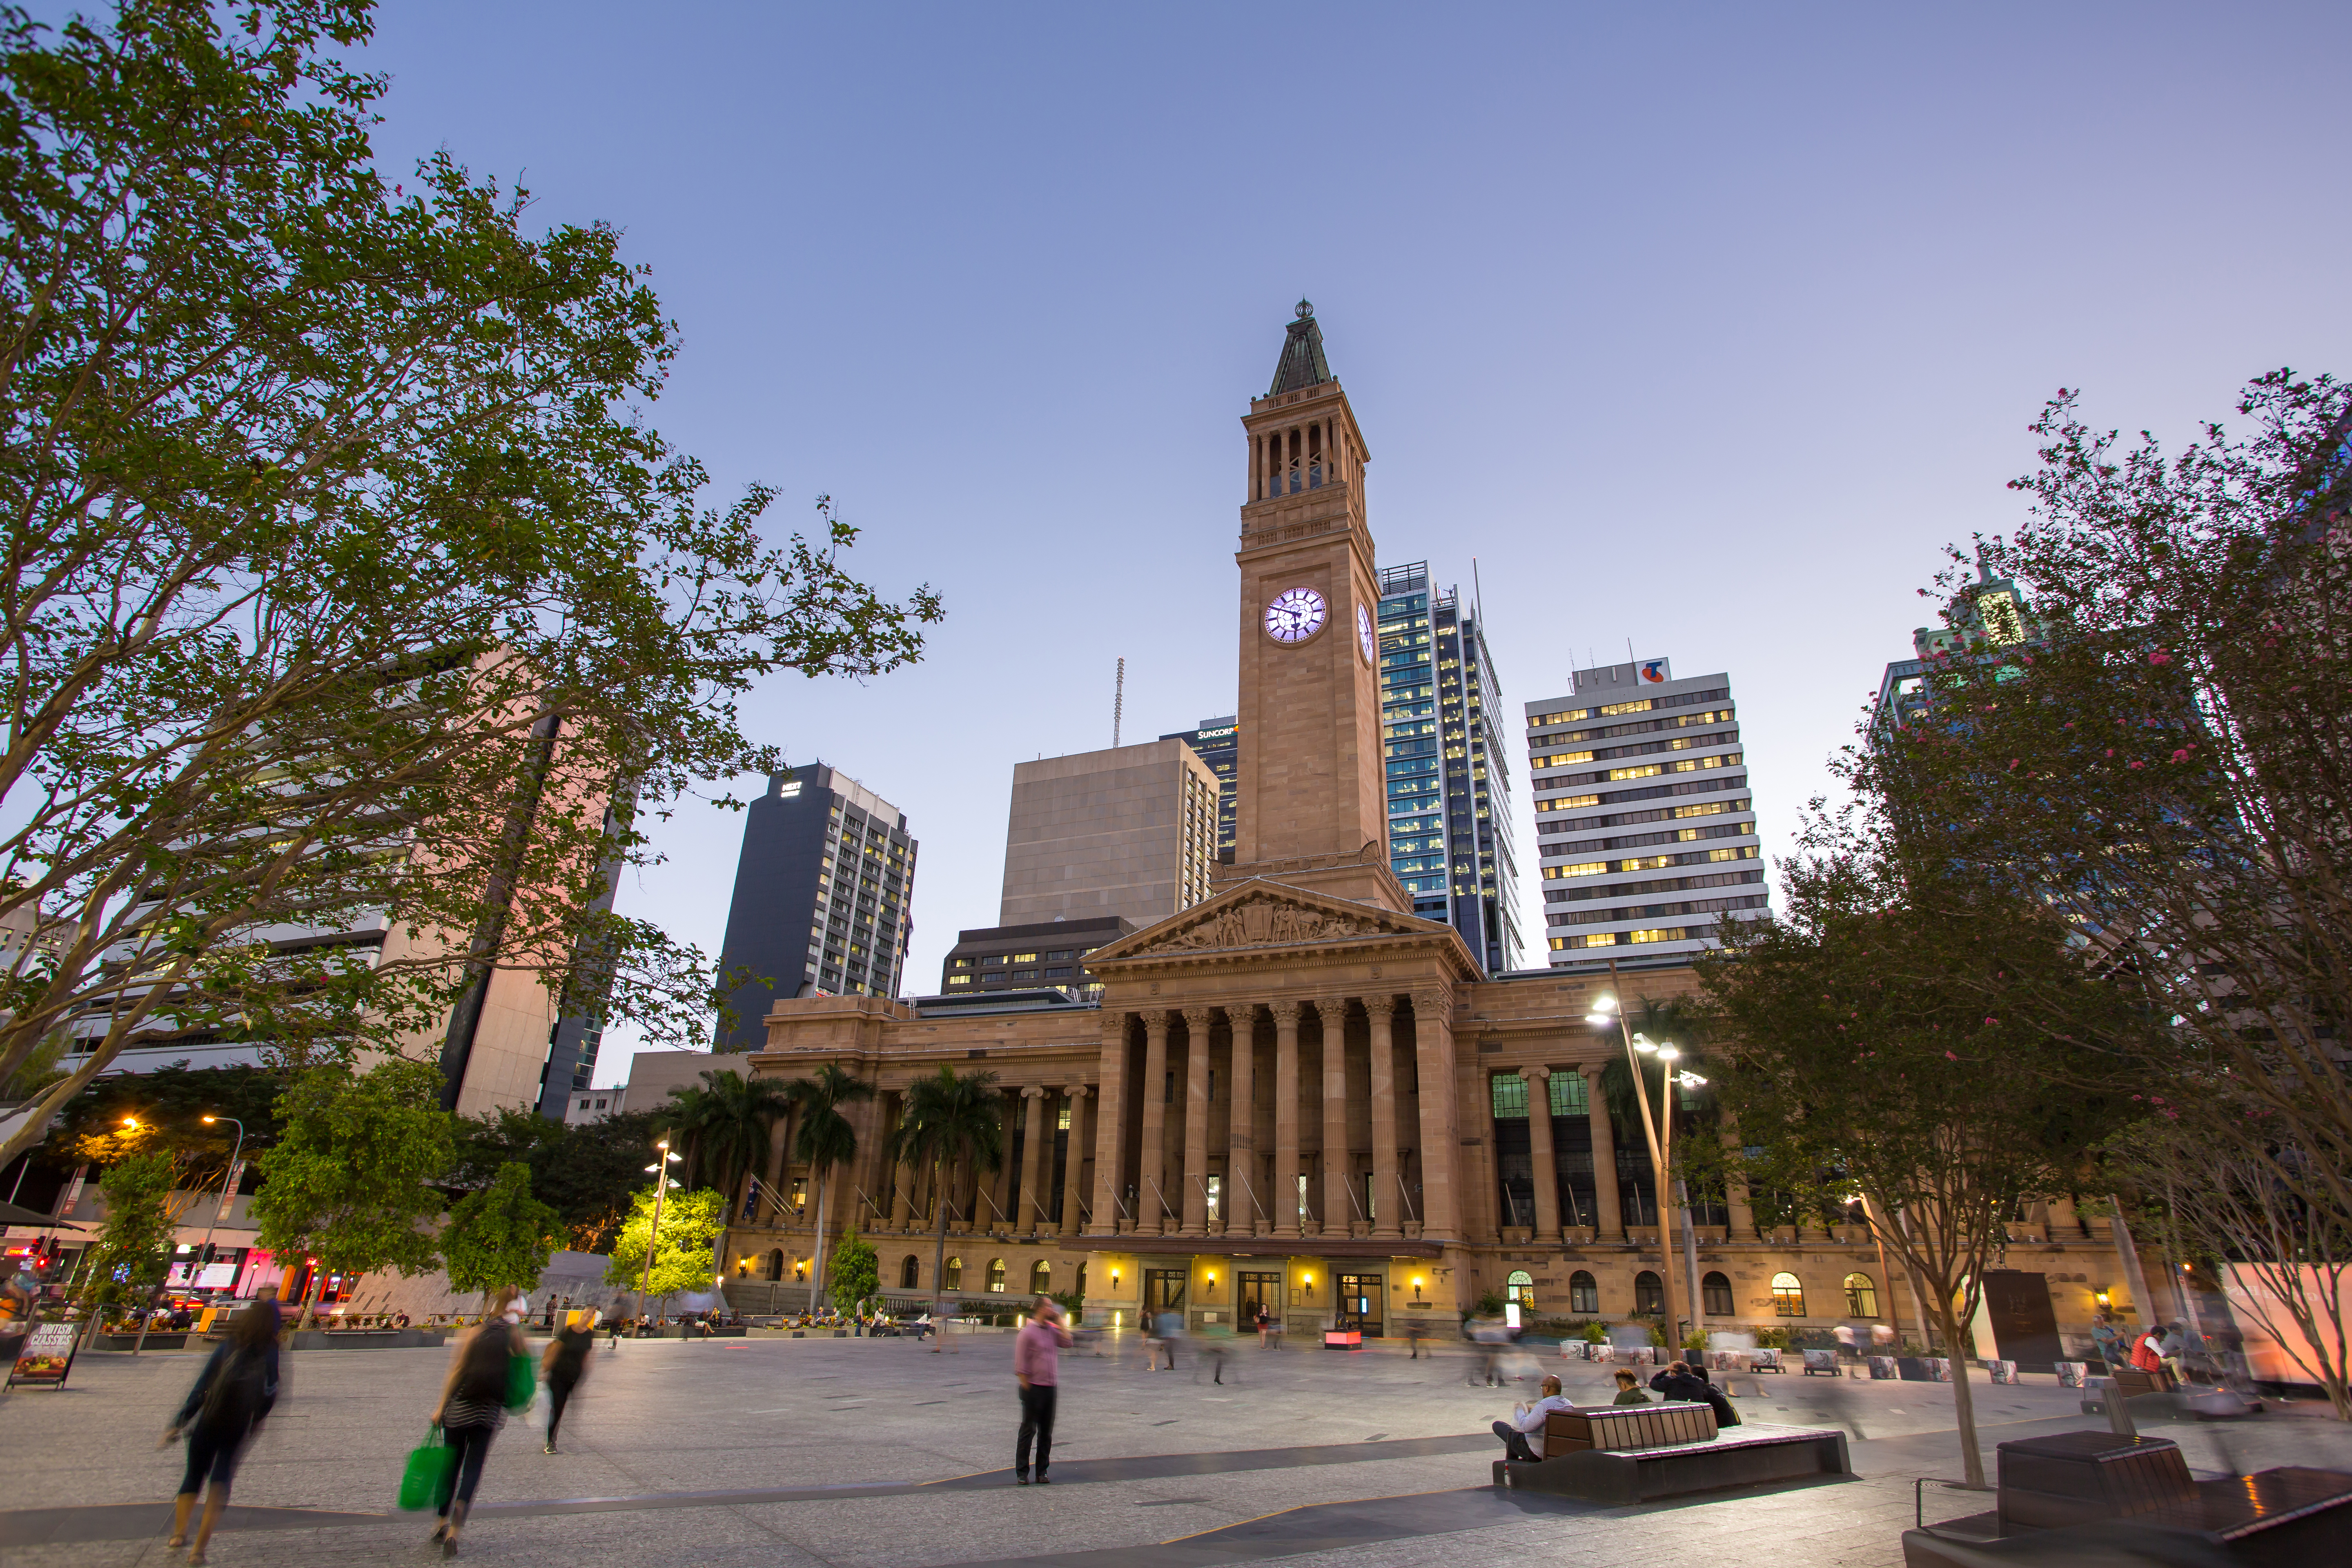 This is an image of the local heritage place known as King George Square, looking towards Brisbane City Hall